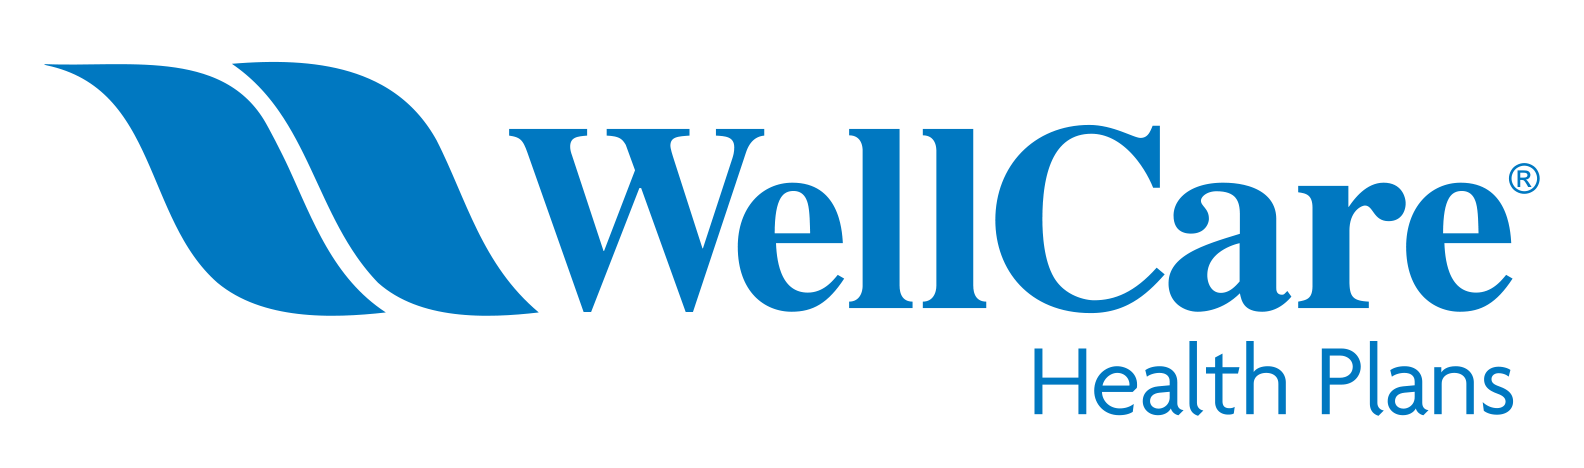 WellCare Health Plans Logo PNG Image